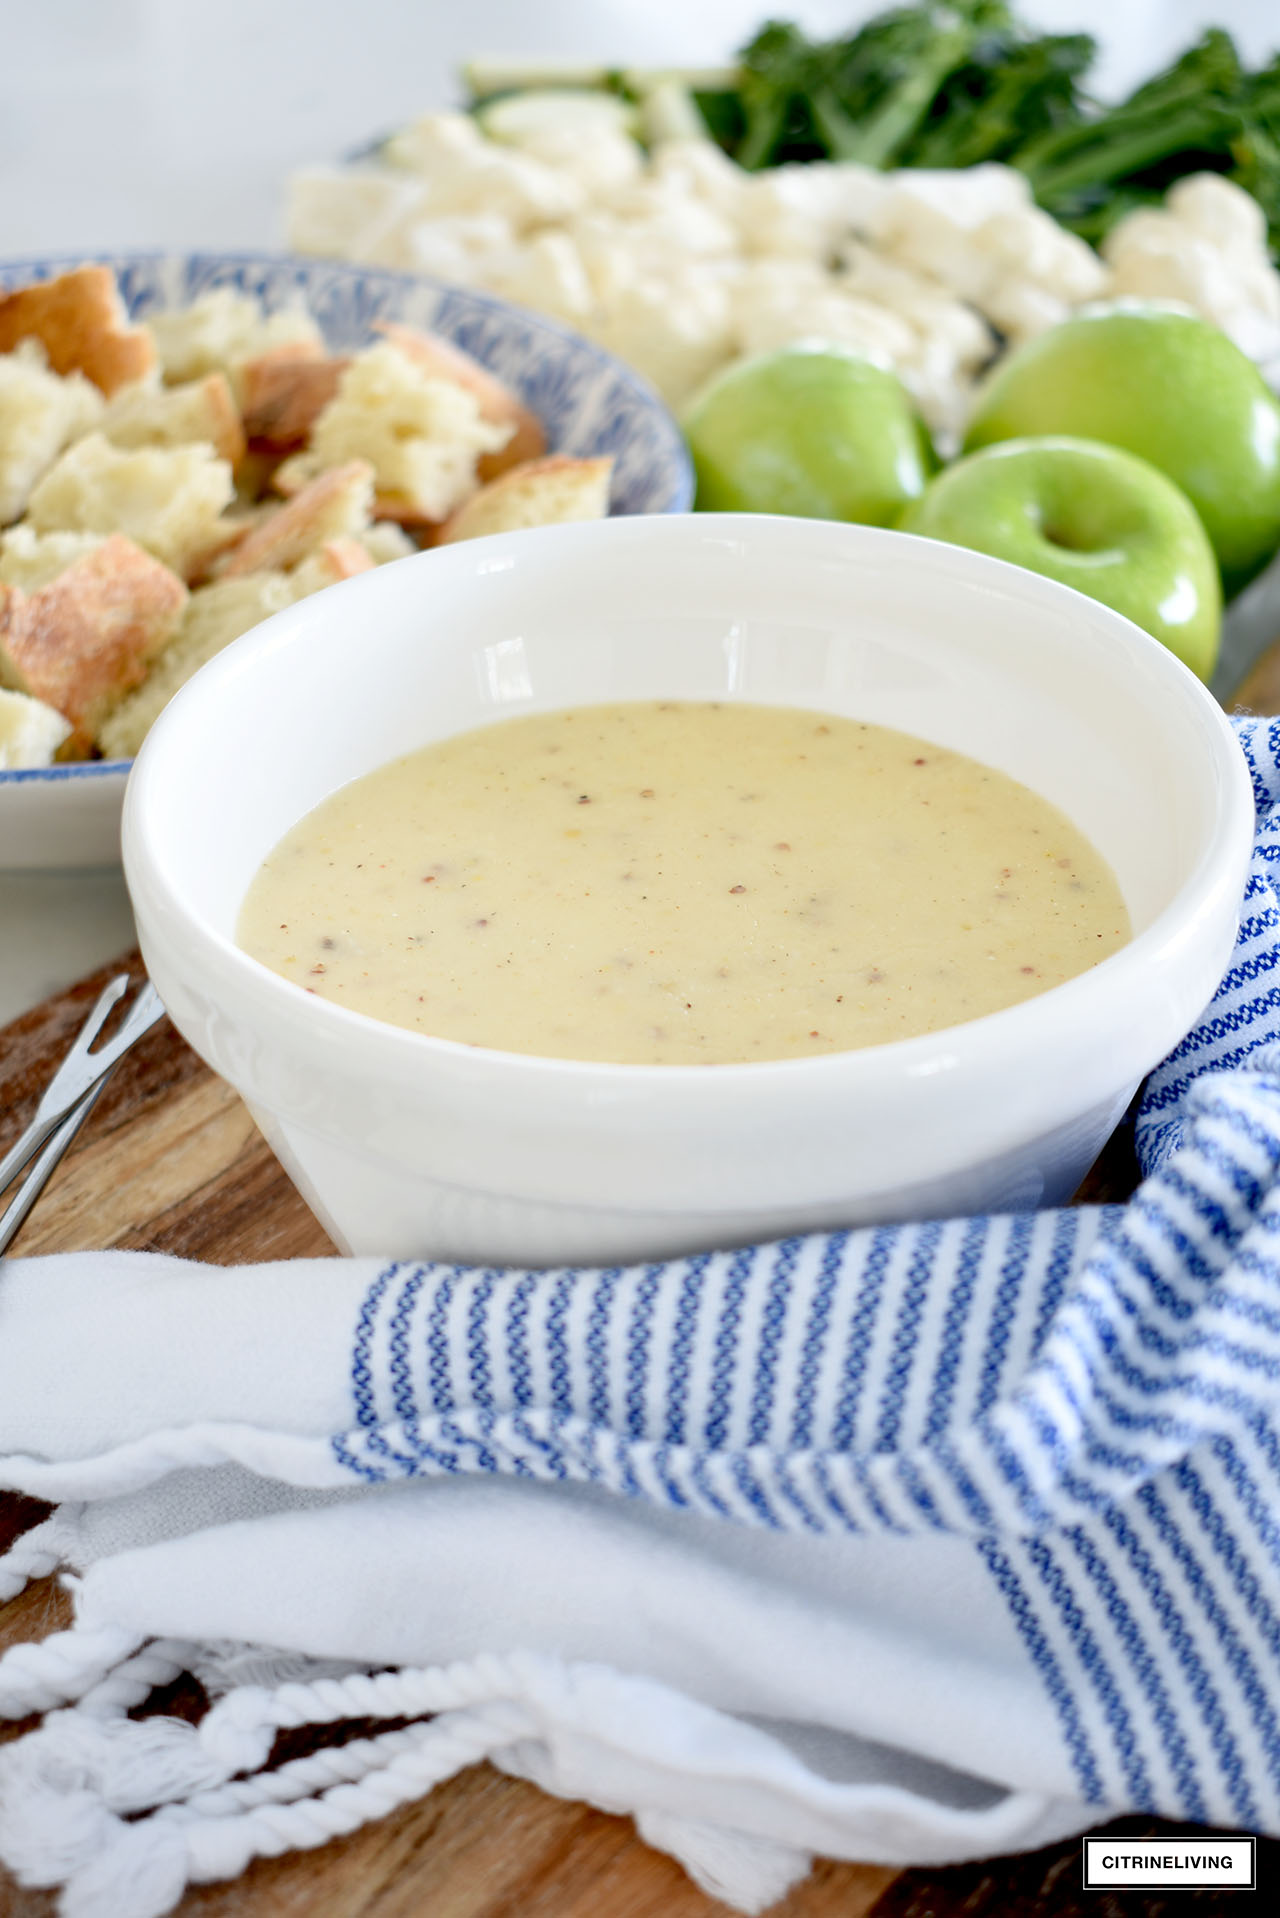 Delicious cheese fondue served with vegetables, bread and fruit.